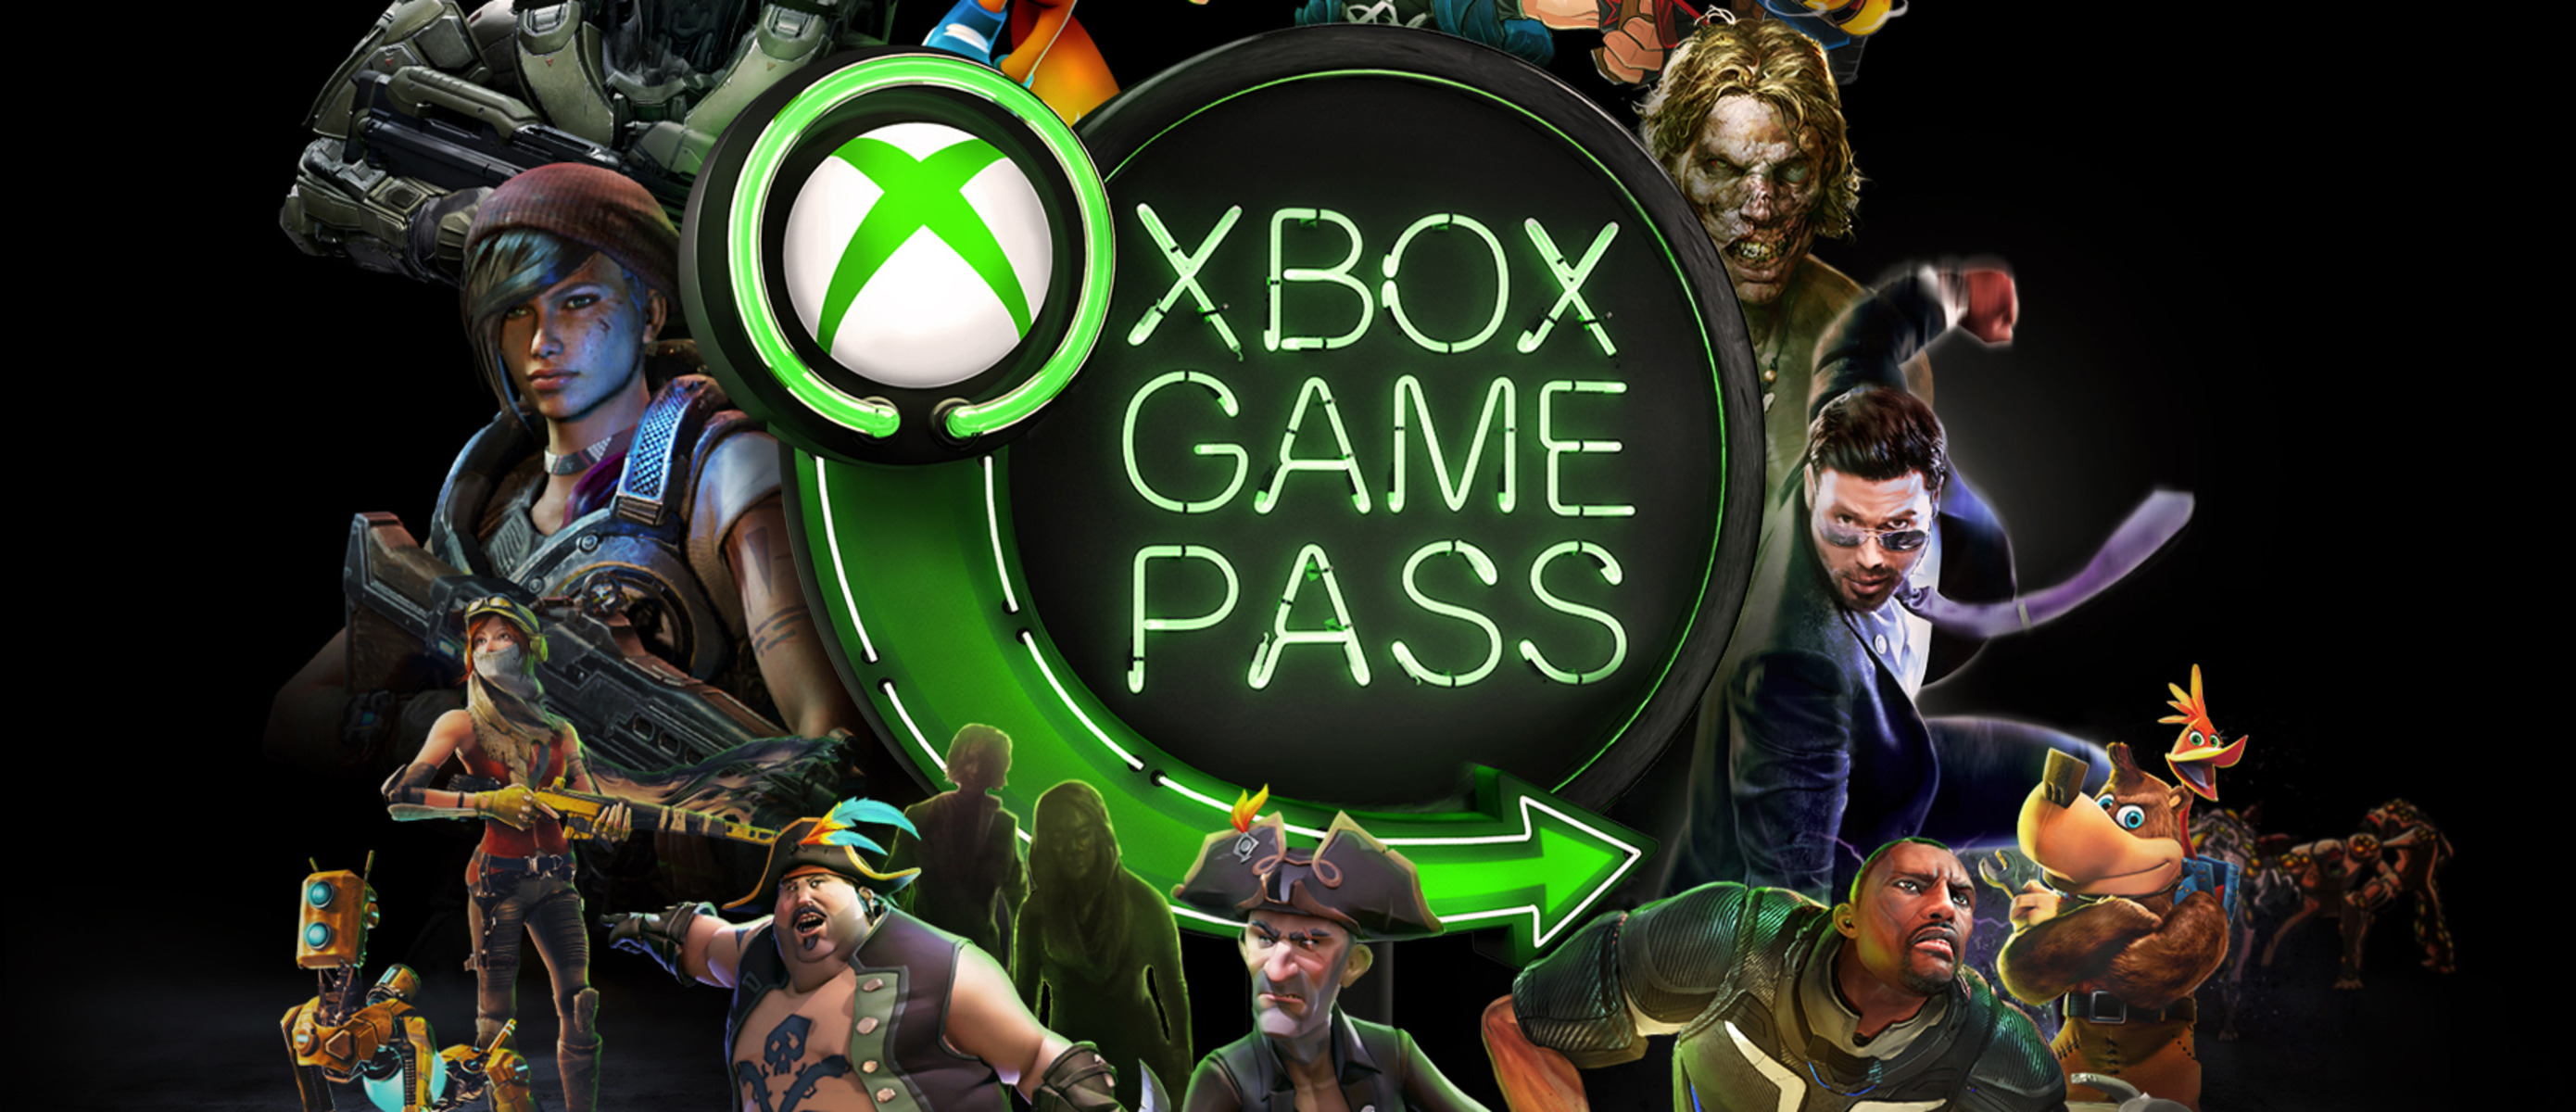 Expeditions game pass. Xbox games. Game Pass. Xbox game Pass. Xbox game Studio.